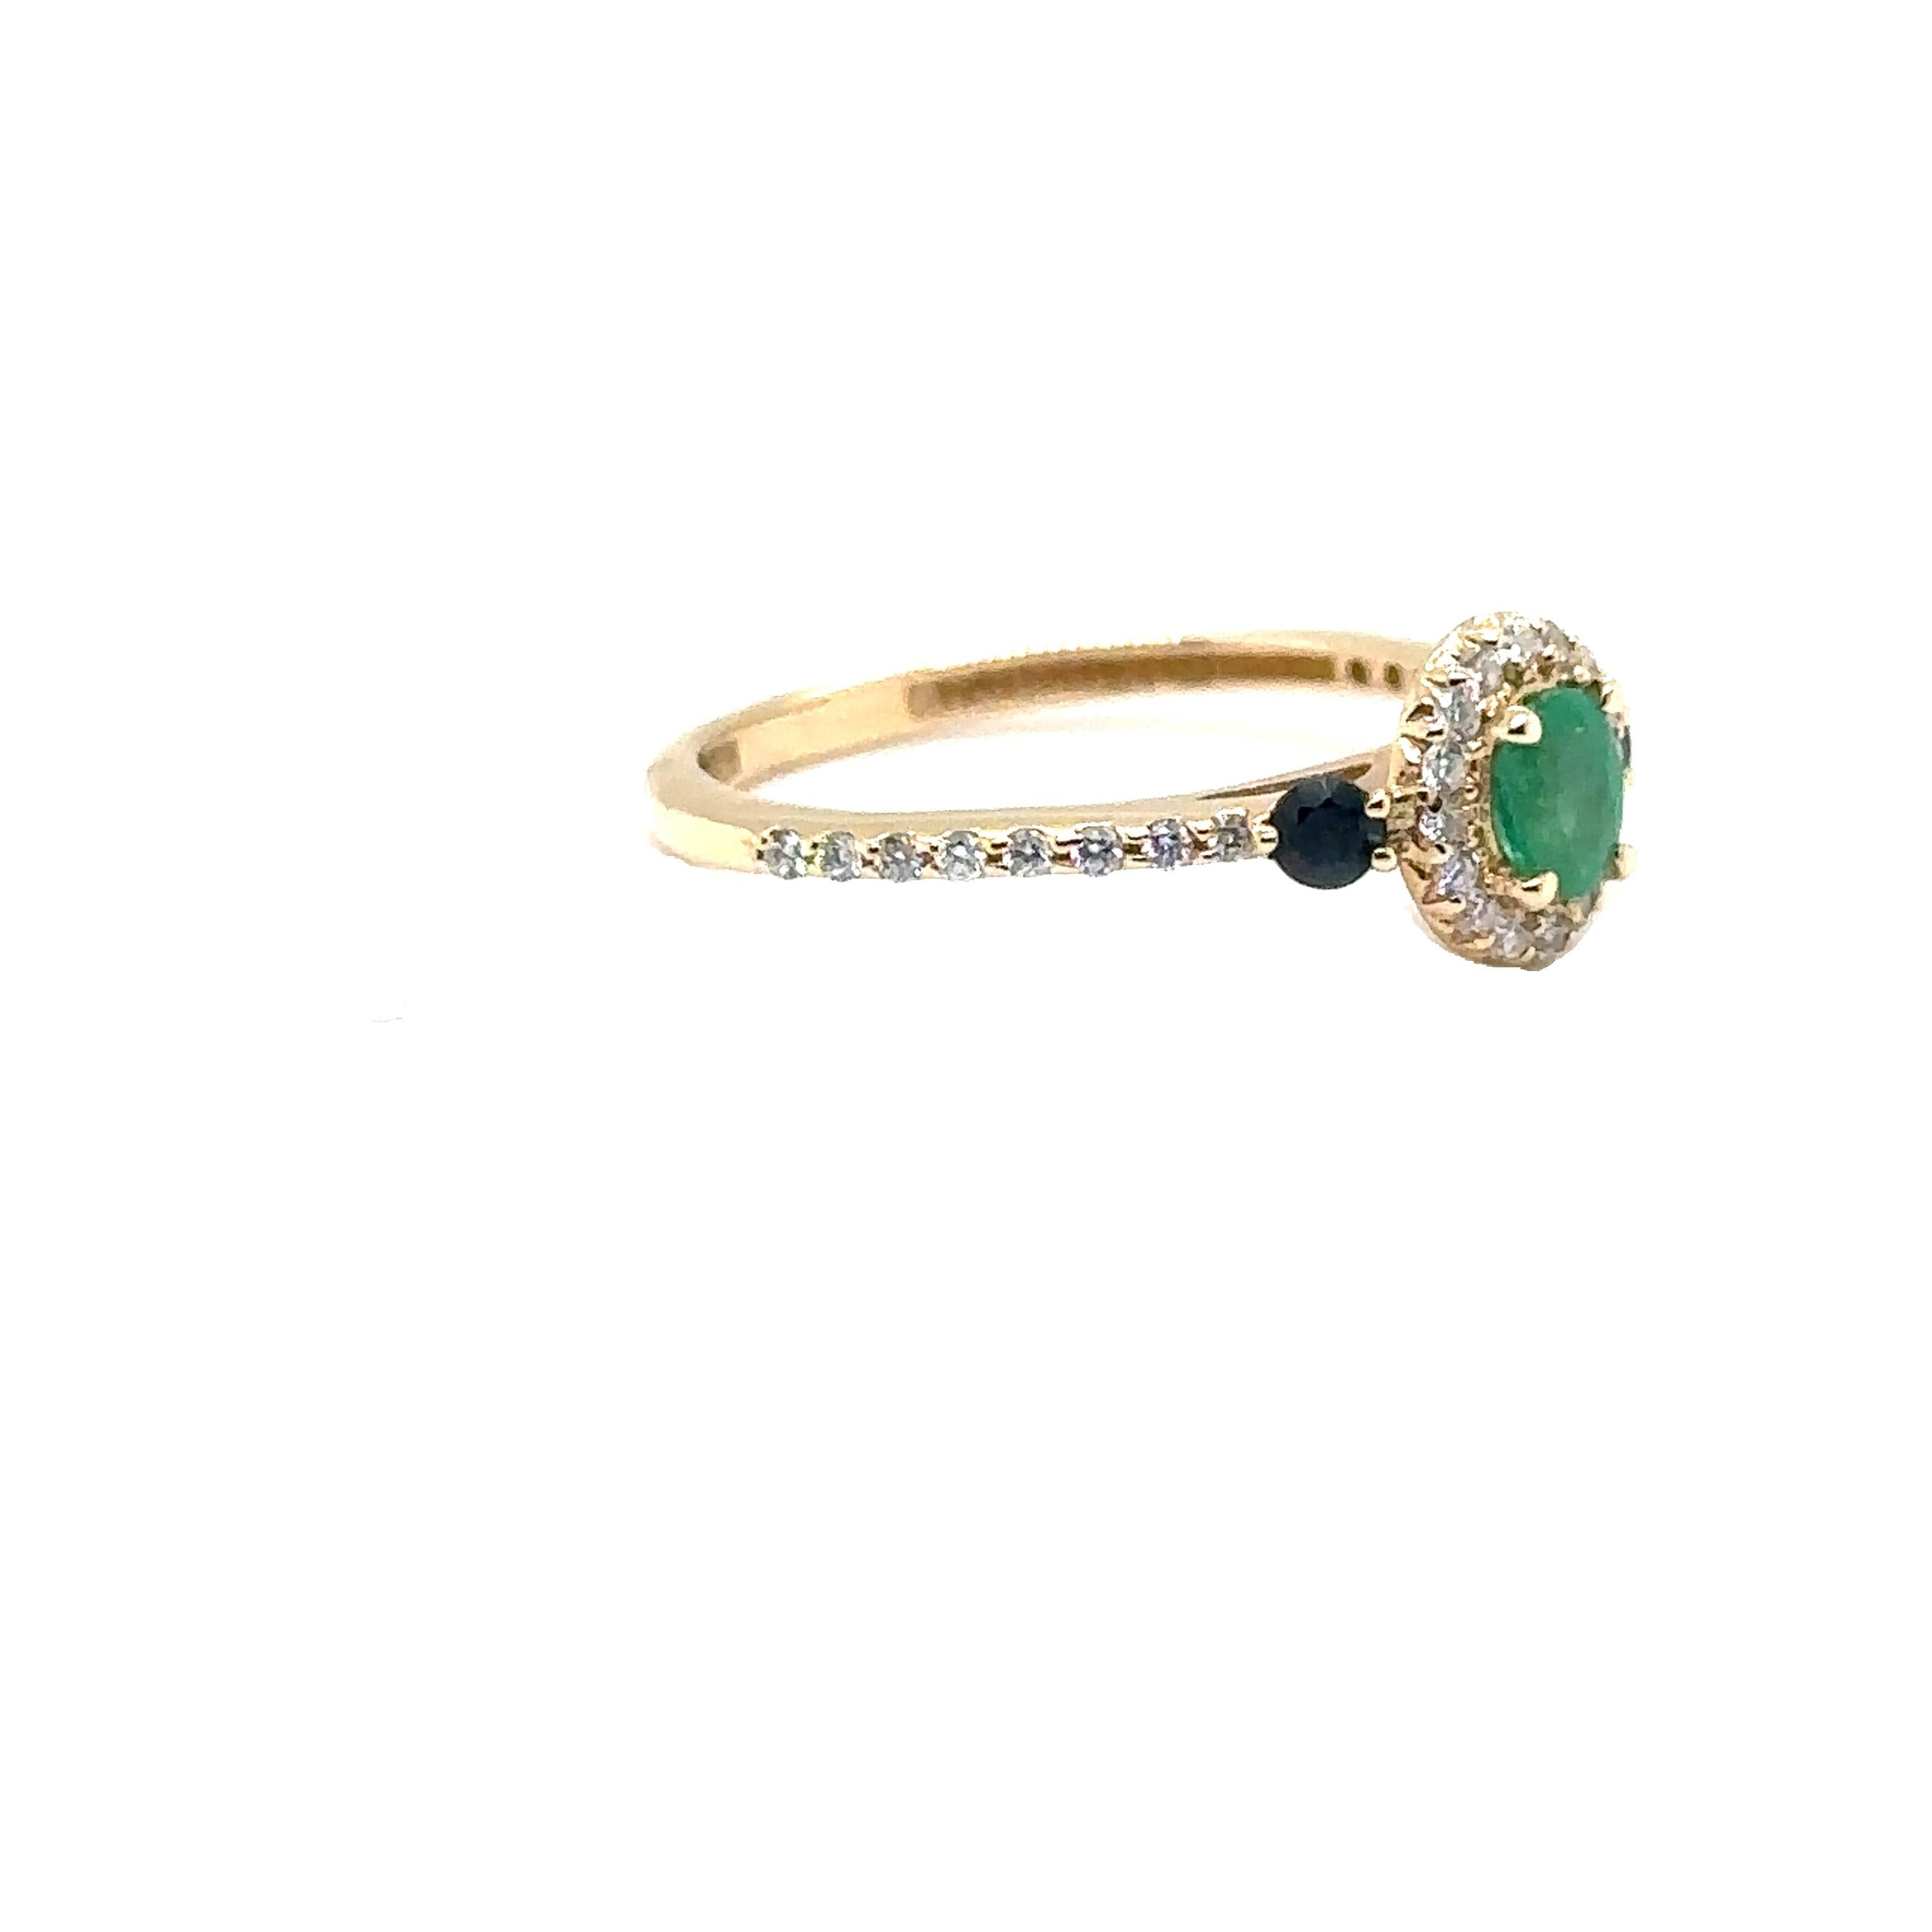 14K YELLOW GOLD RING w EMERALD, SAPPHIRES & DIAMONDS 
Metal: 14K YELLOW GOLD
Diamond Info: GH-SI1 0.32CT
Stones Info: EMERAL 0.35CT 
                      SAPPHIRE 0.08CT
Total Dia Weight:   0.32 cwt.
Total Stones Weight: 0.43 CT
Item Weight: 2.26